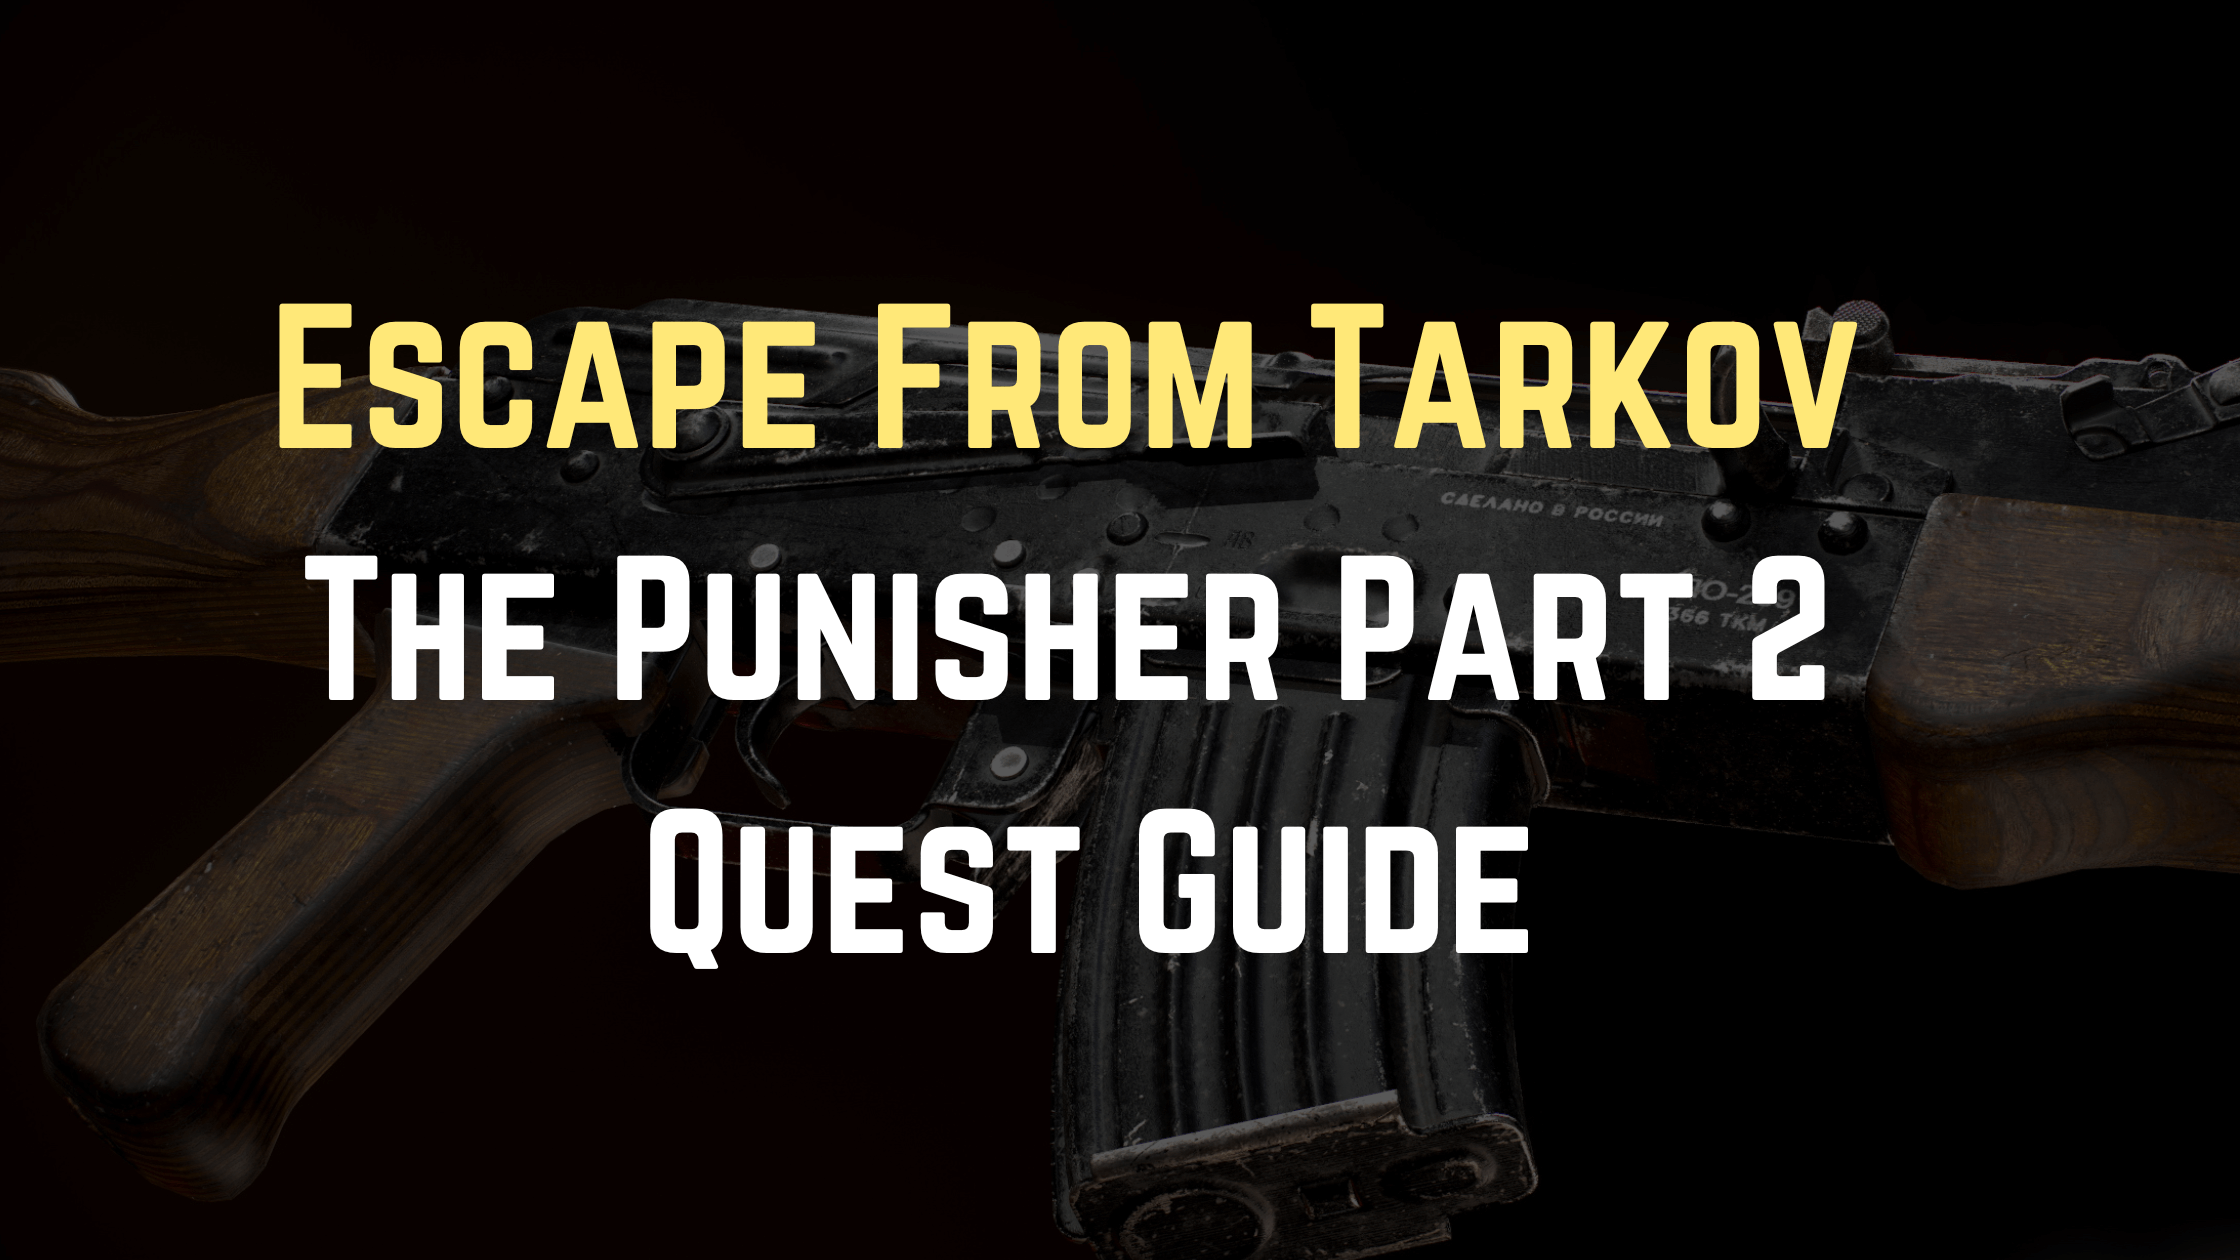 The Punisher Part 2 Quest Guide